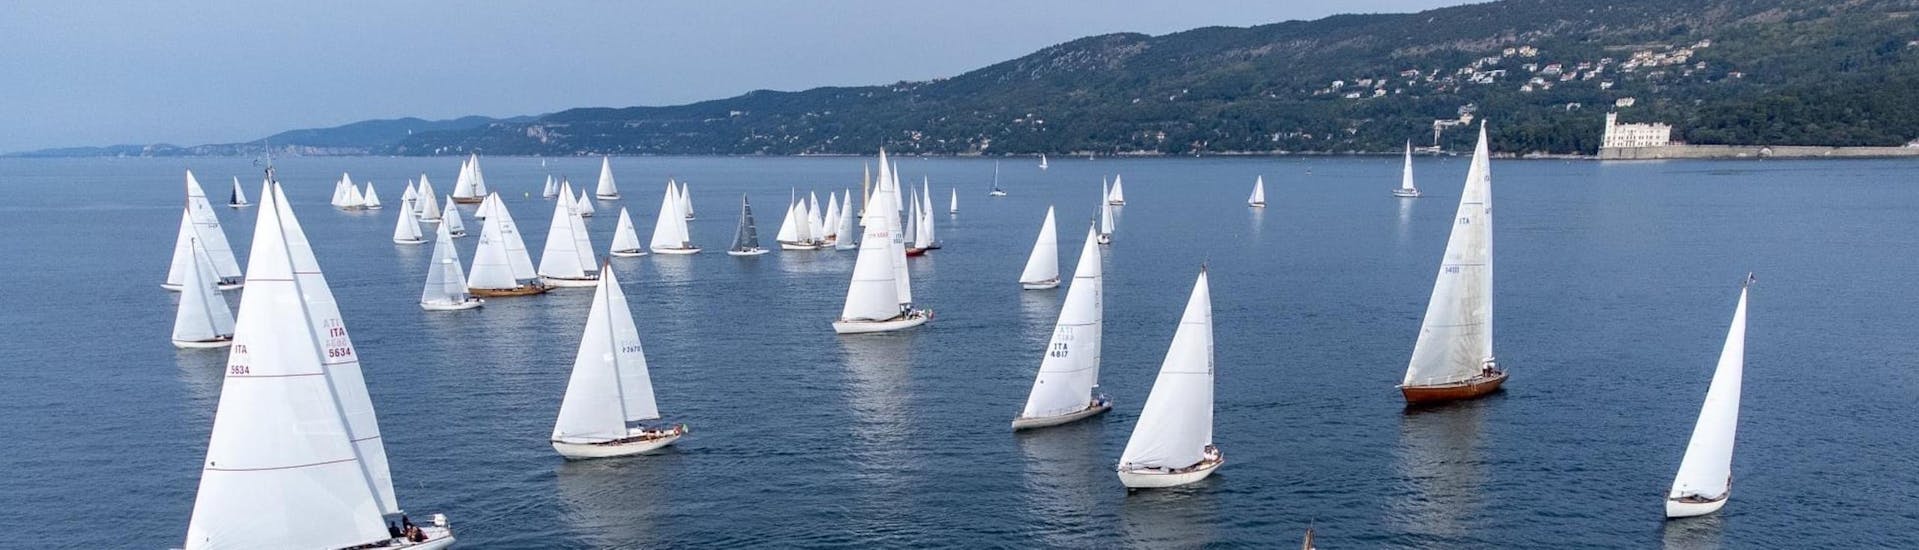 View of sailboats cruising through the Trieste Gulf from Roberta III Monfalcone.